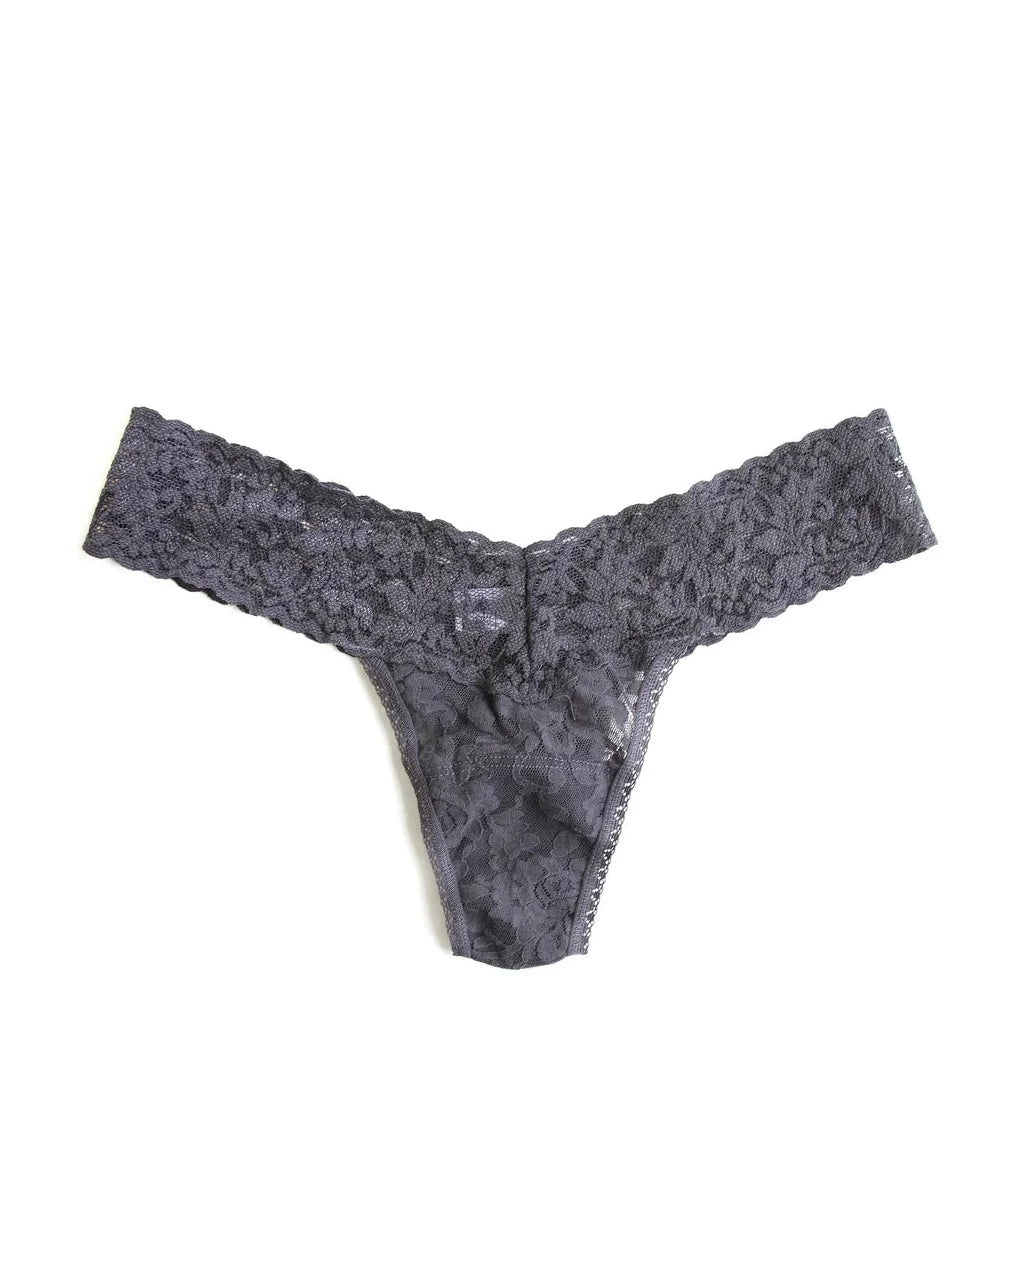 Low Rise Thong - Beestung Lingerie